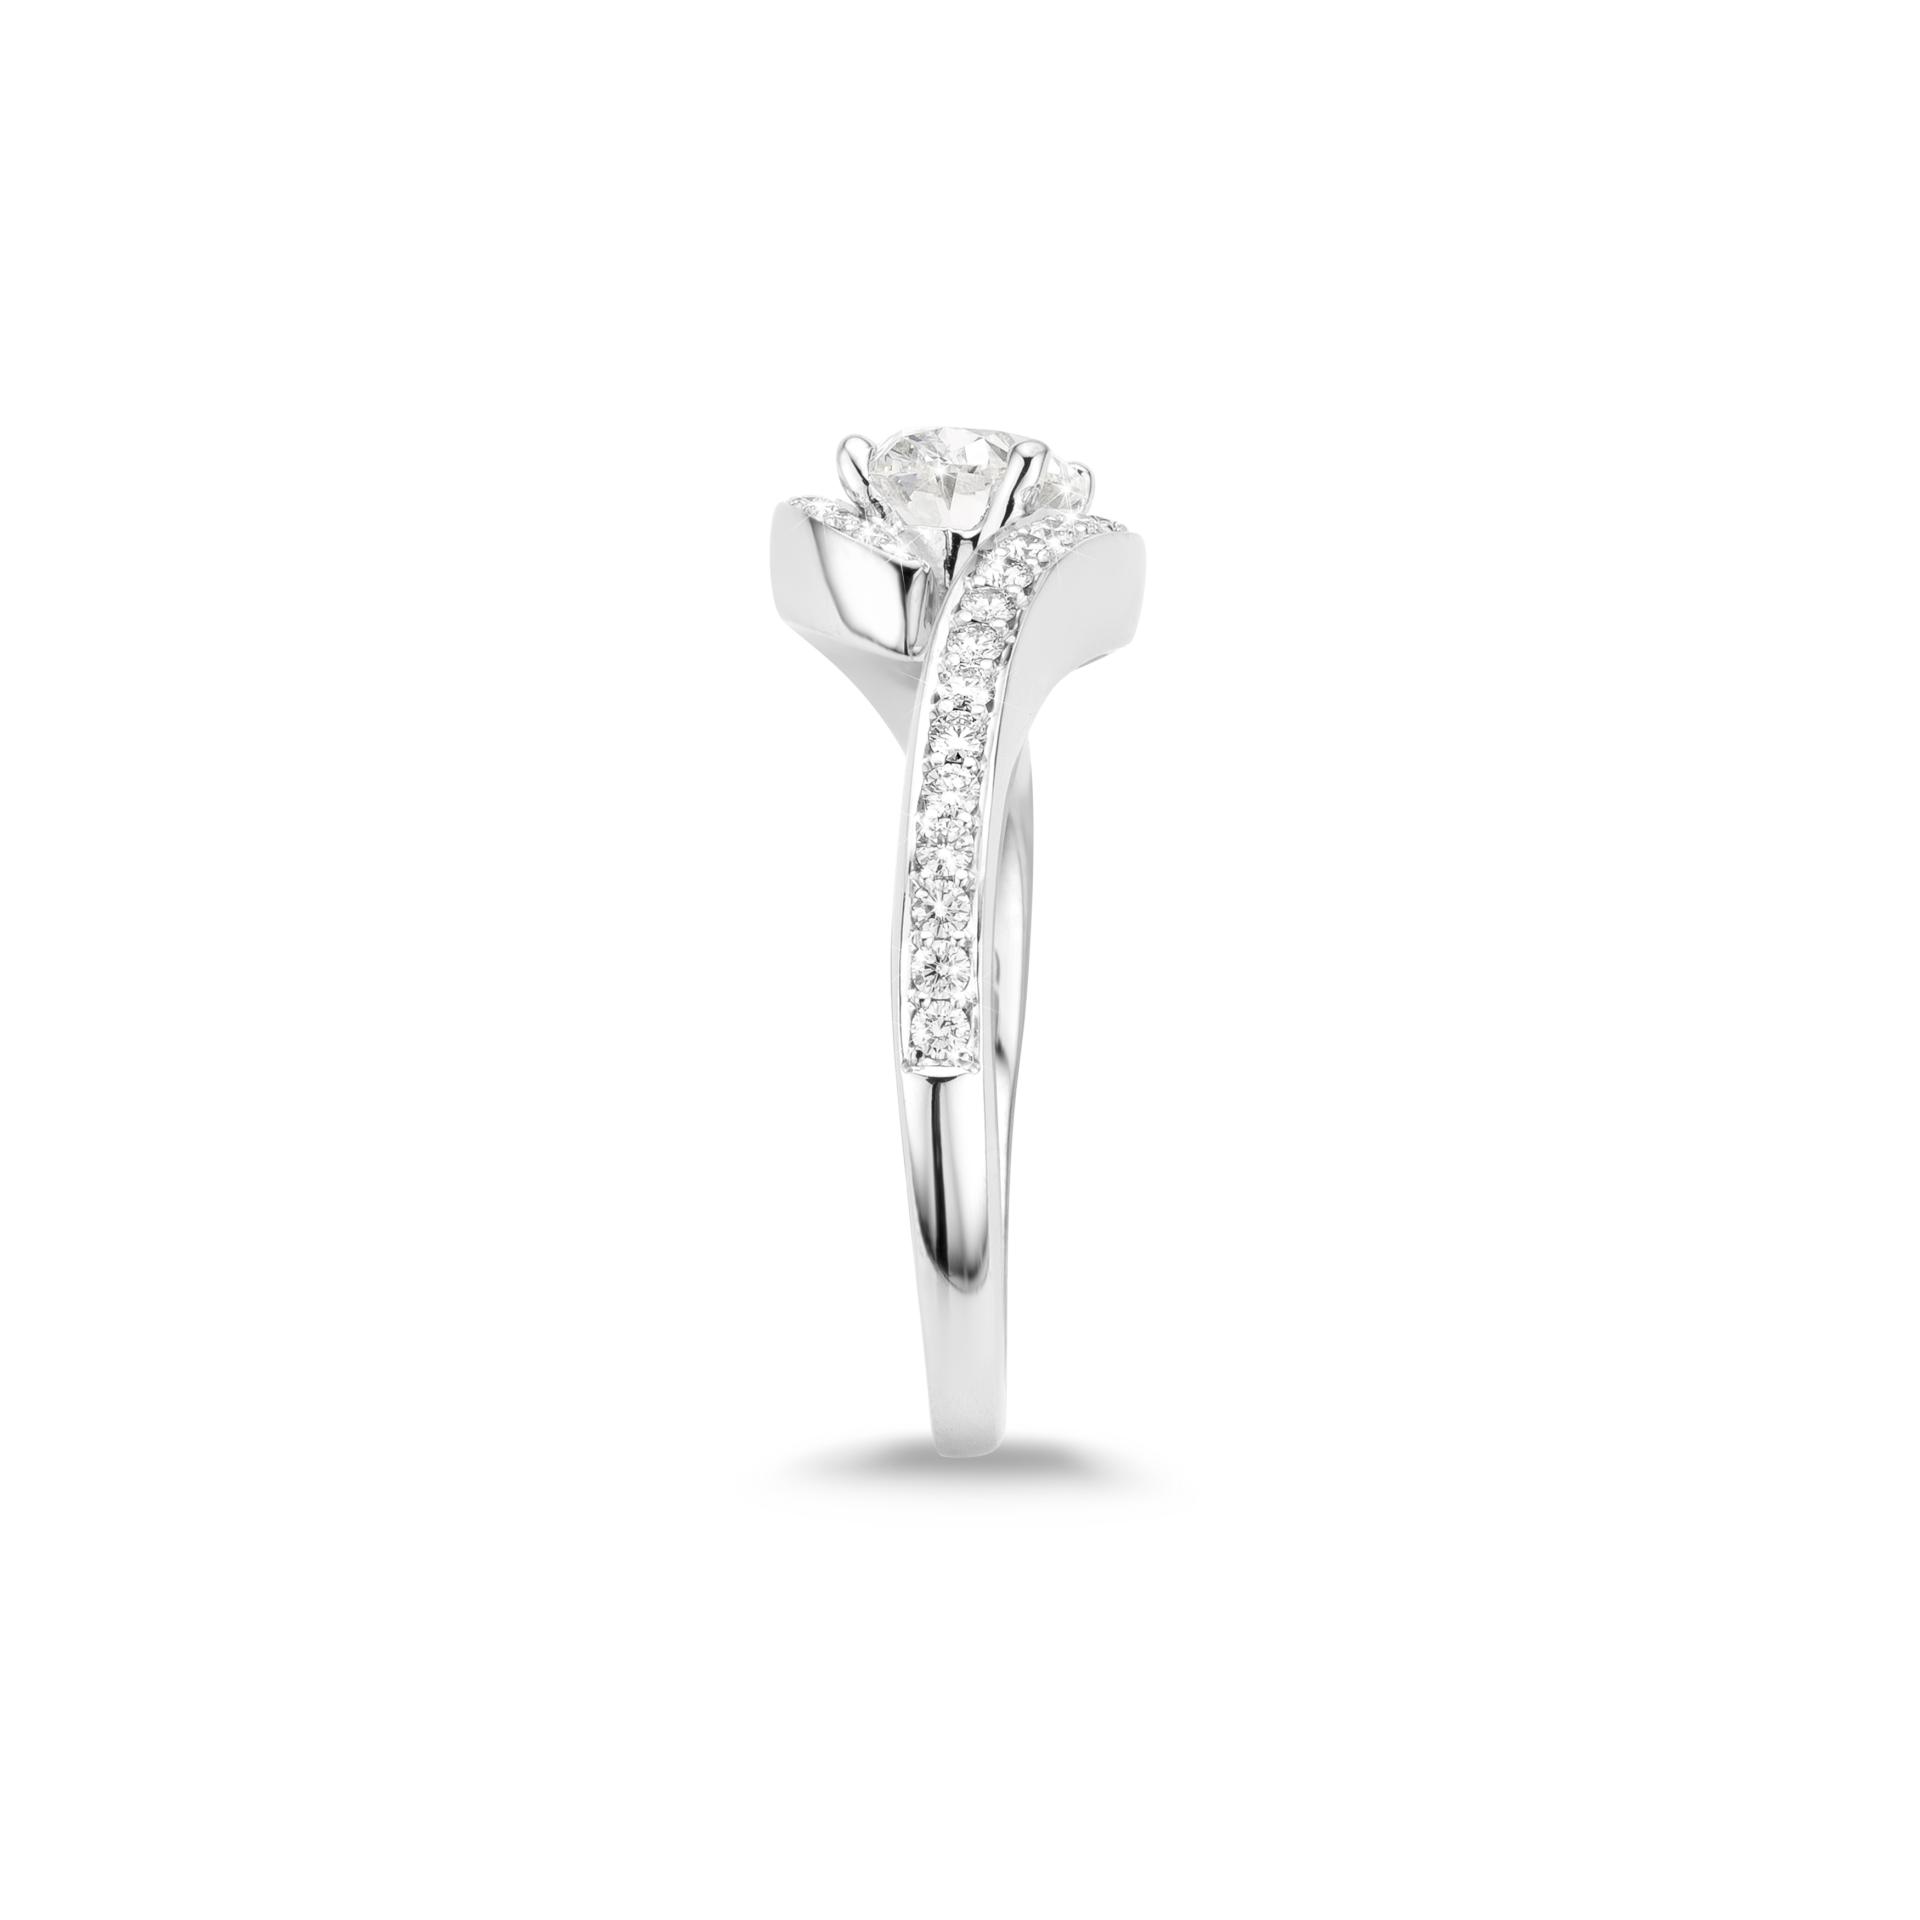 White gold ring set with oval shaped diamond and brilliant cut diamonds made by Maison De Greef